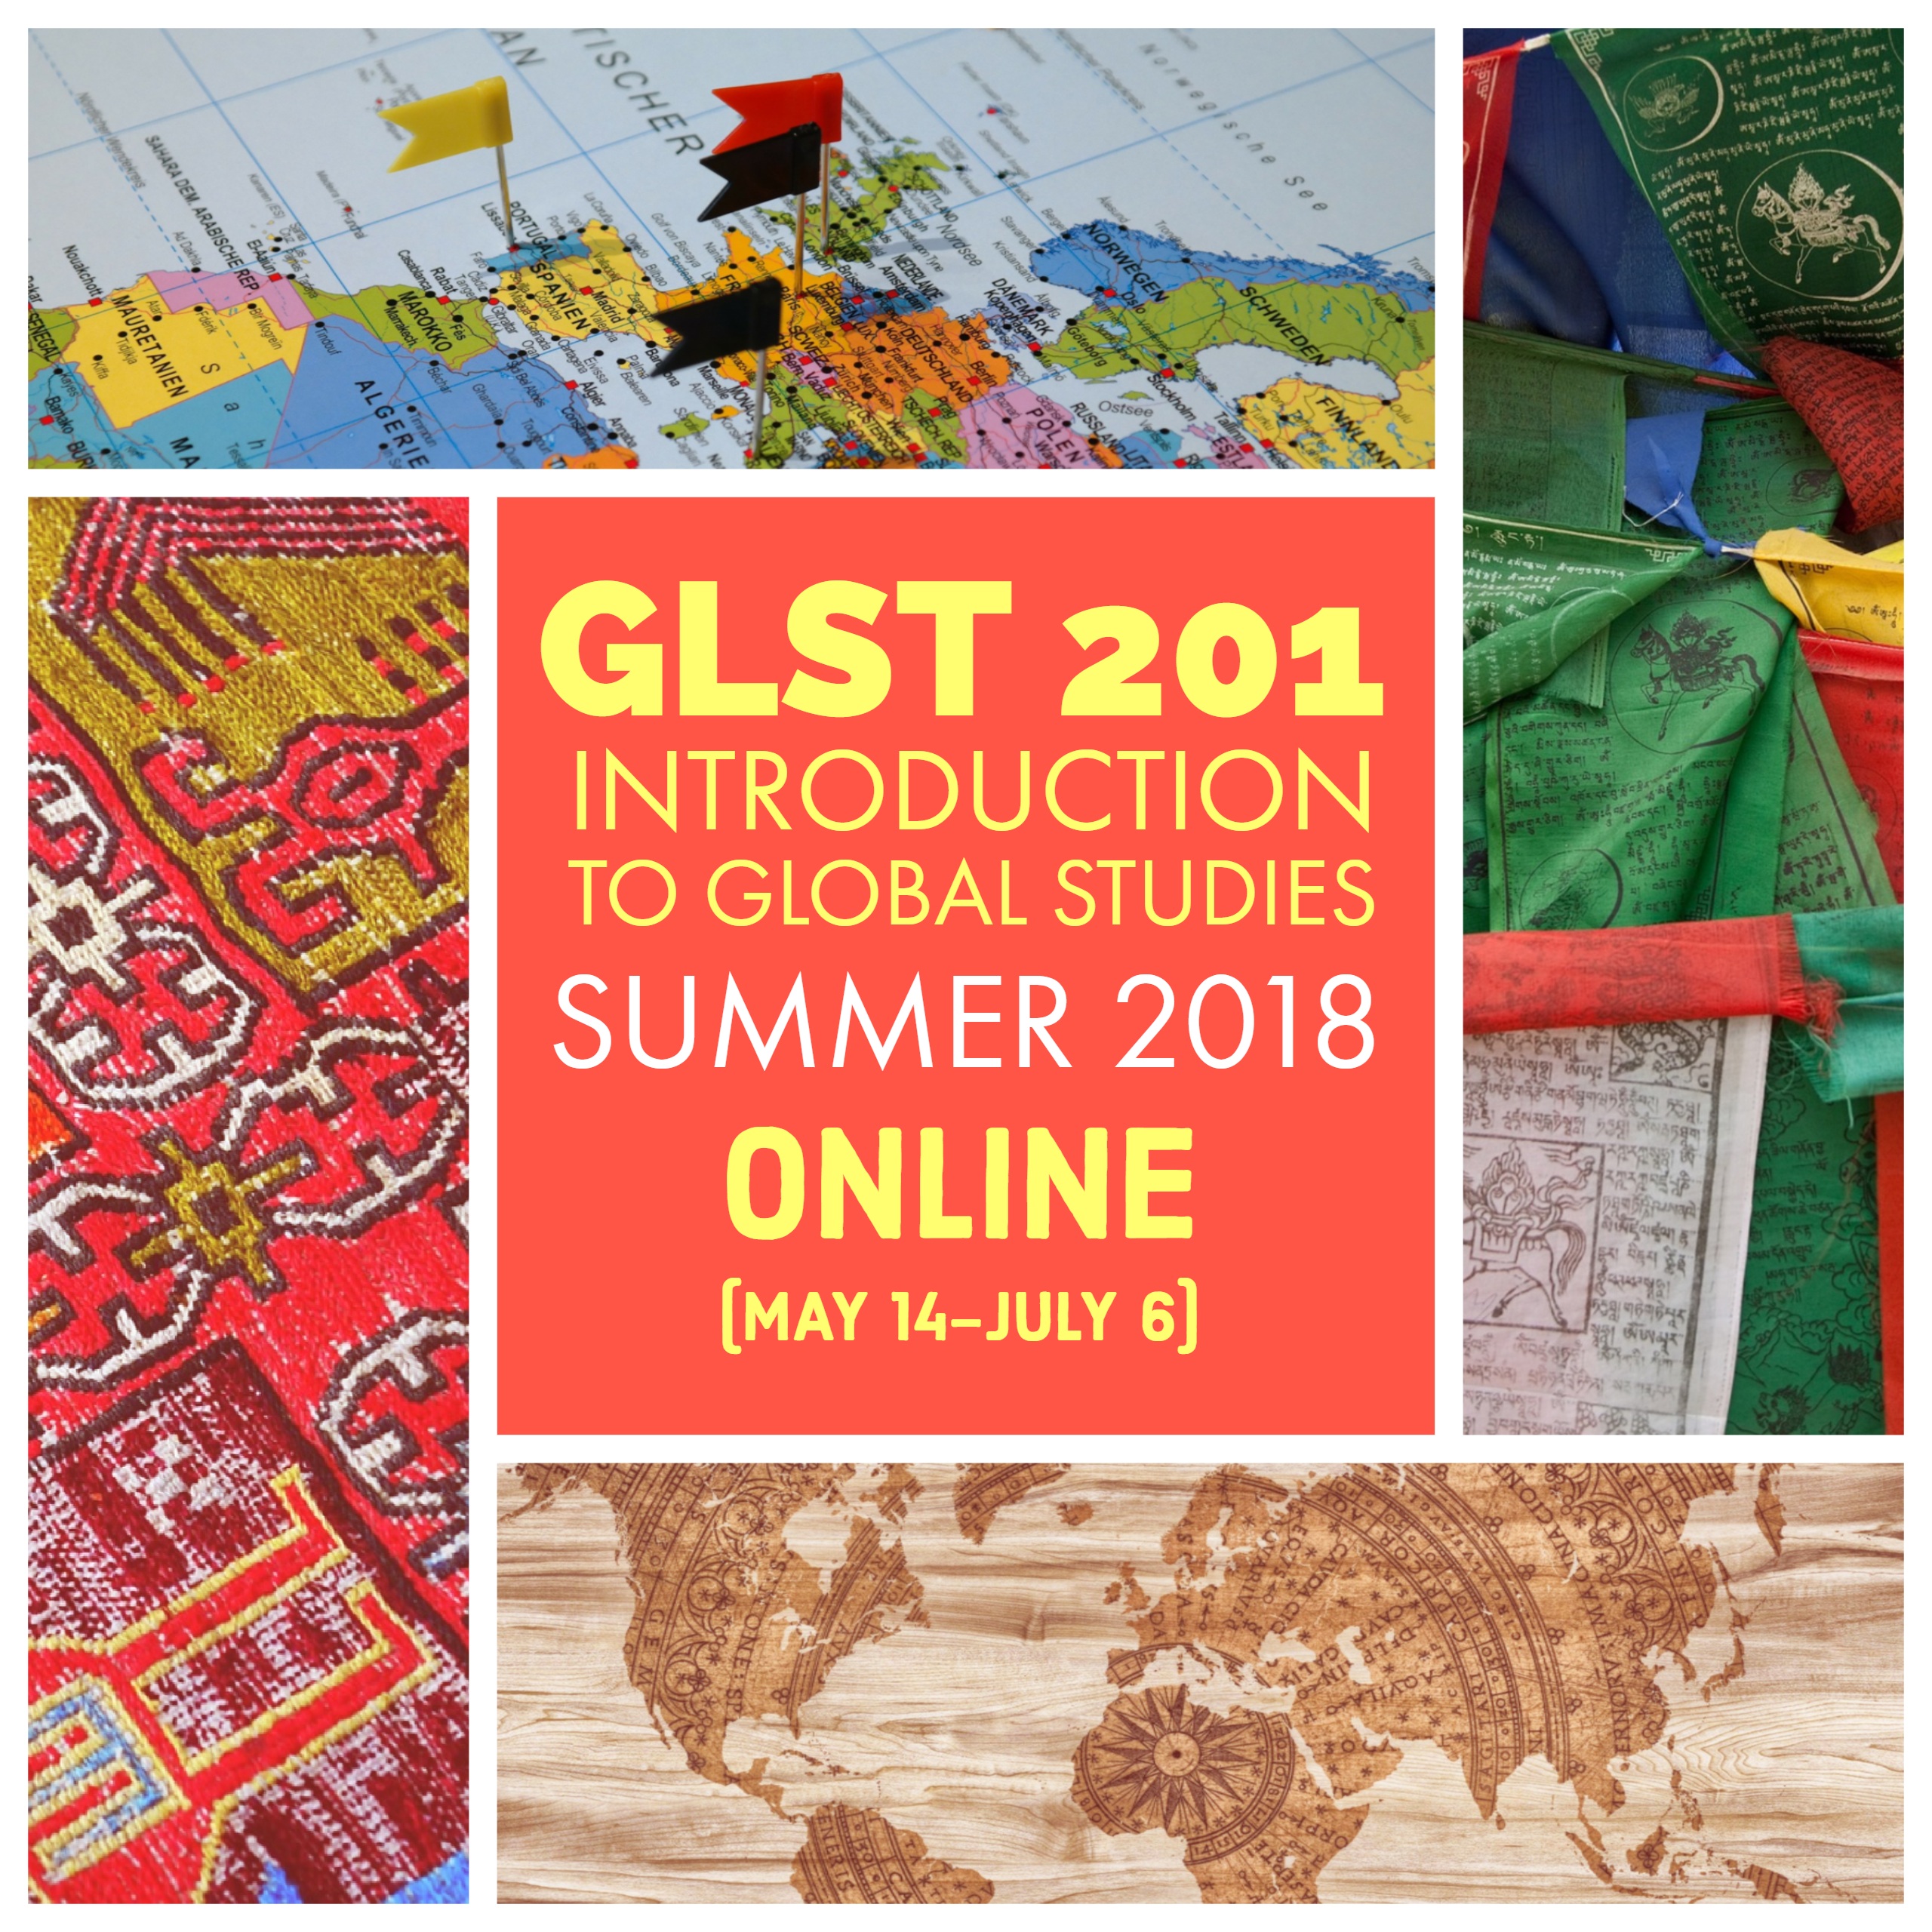 GLST 201: Introduction to Global Studies SUMMER 2018